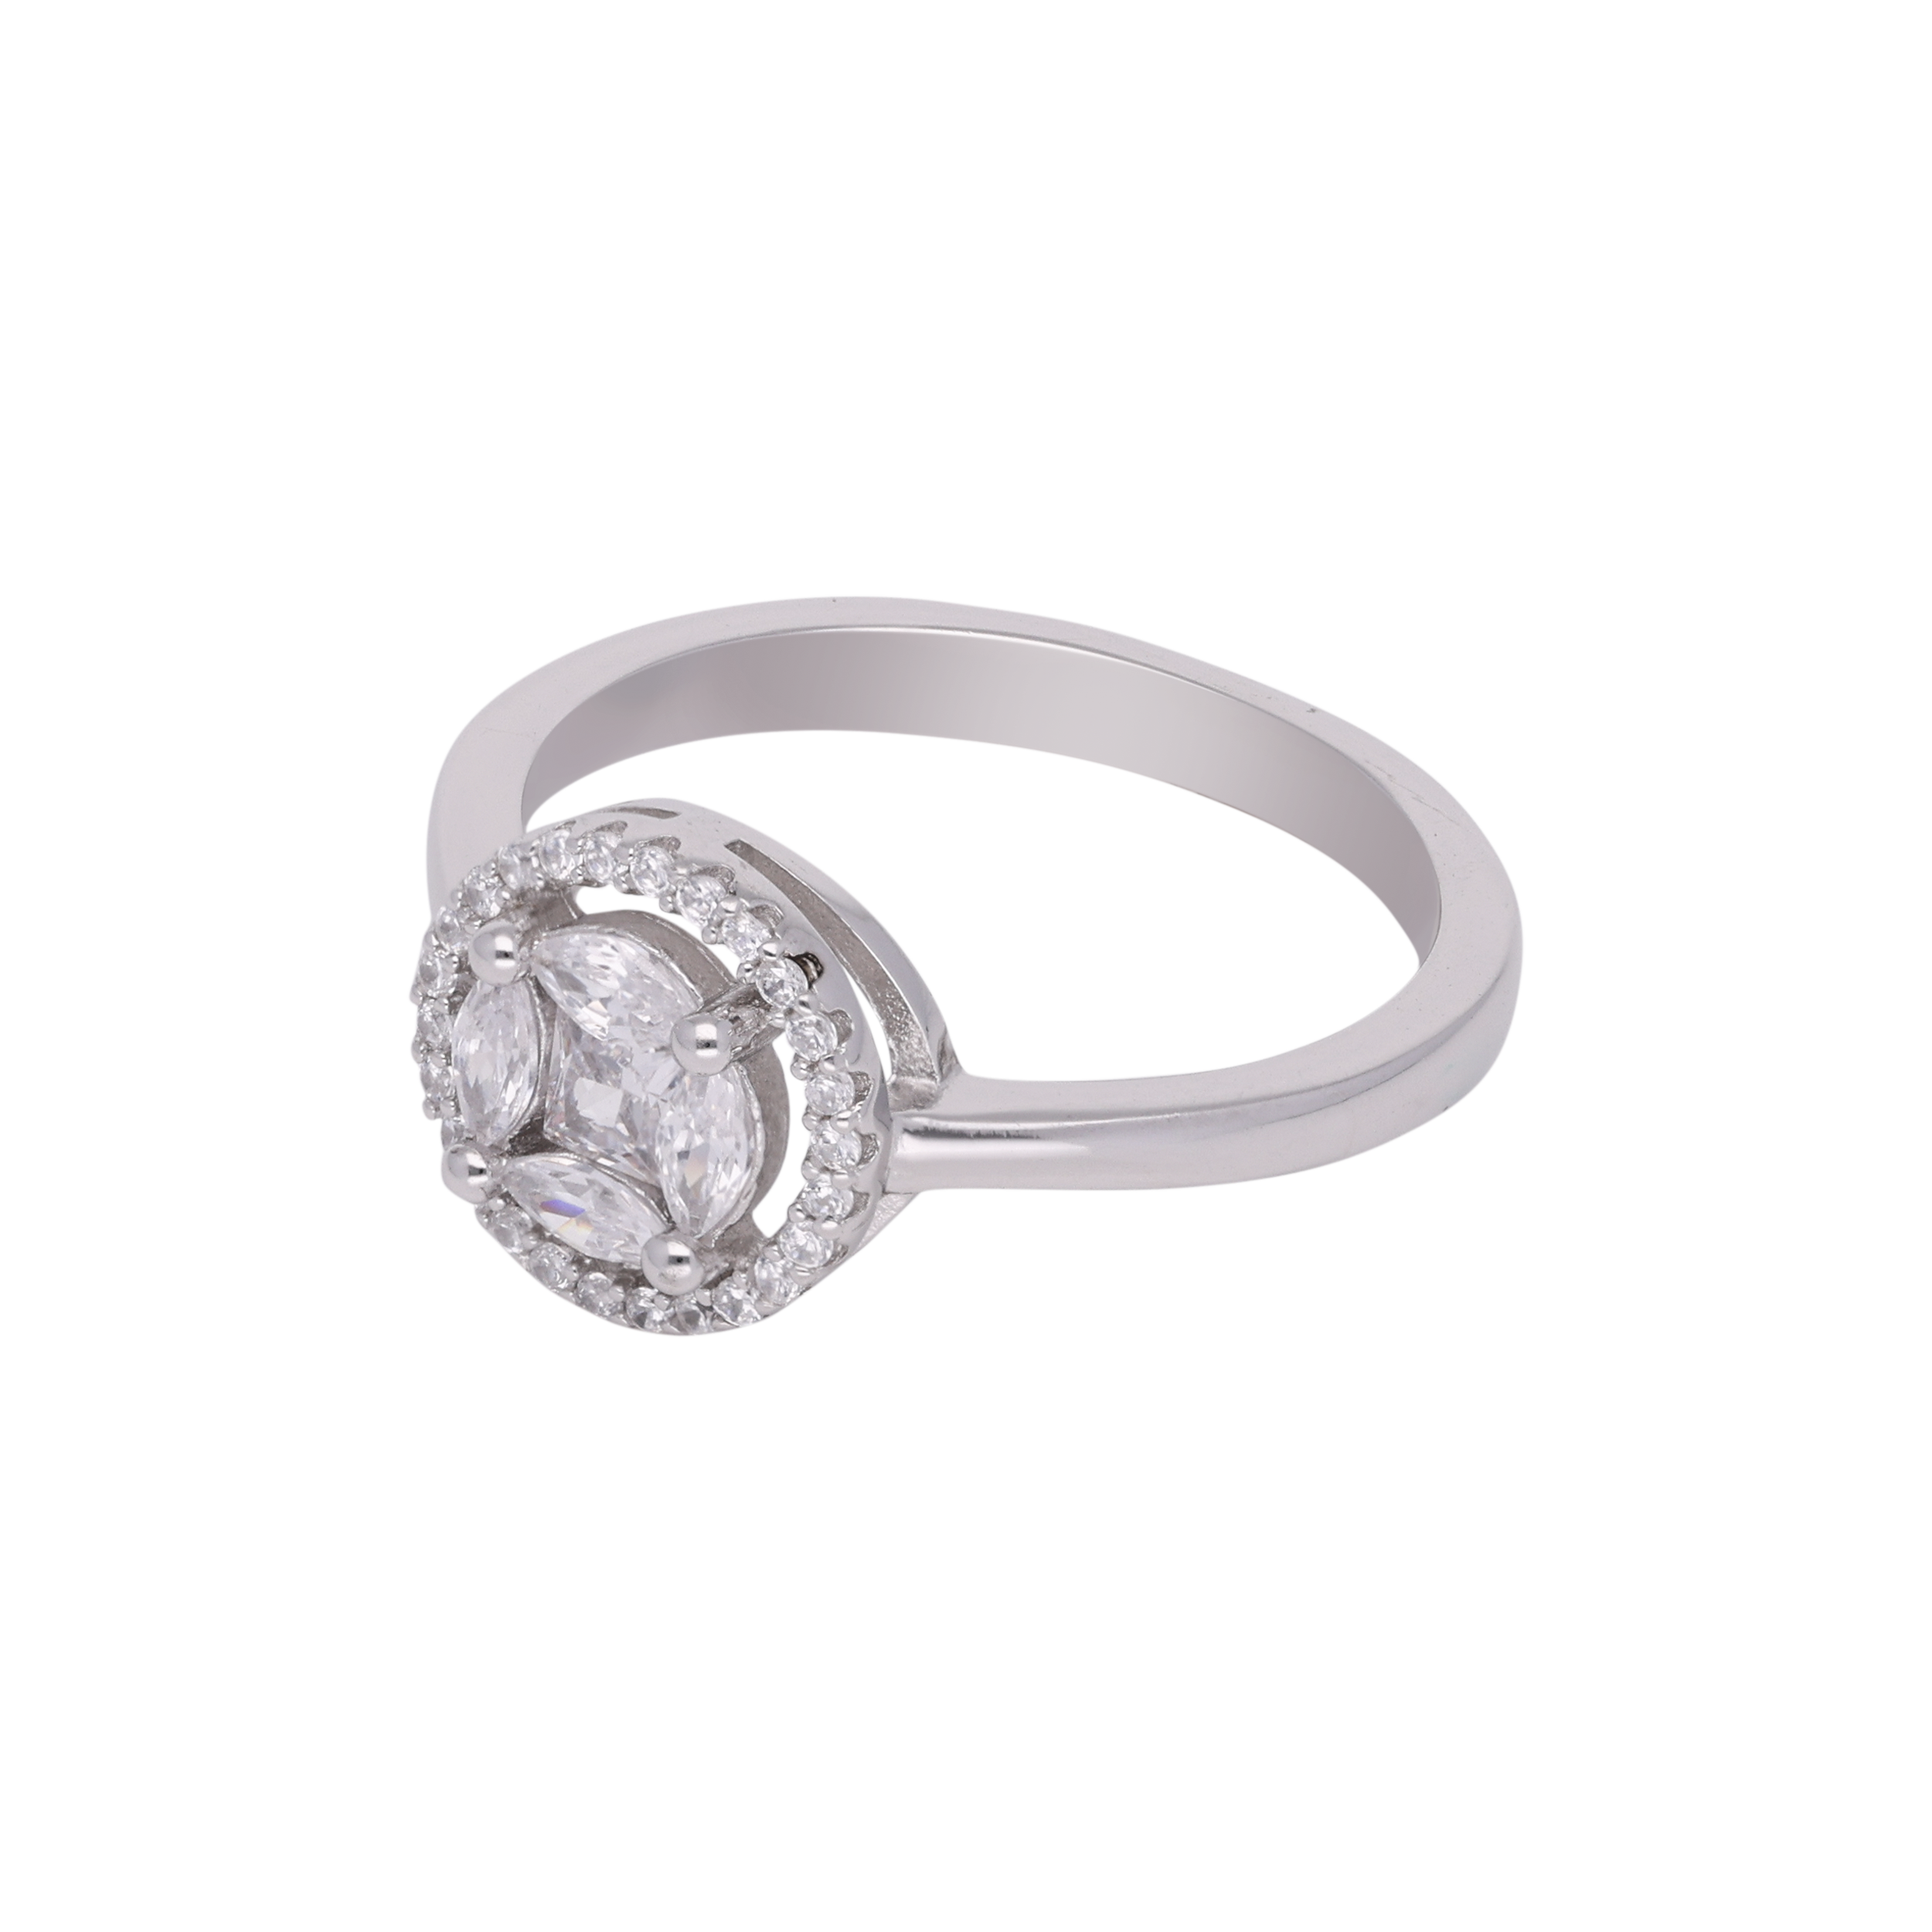 Sterling Silver Round Ring with Cubic Zirconia Design | SKU: 0002984100, 0002983950